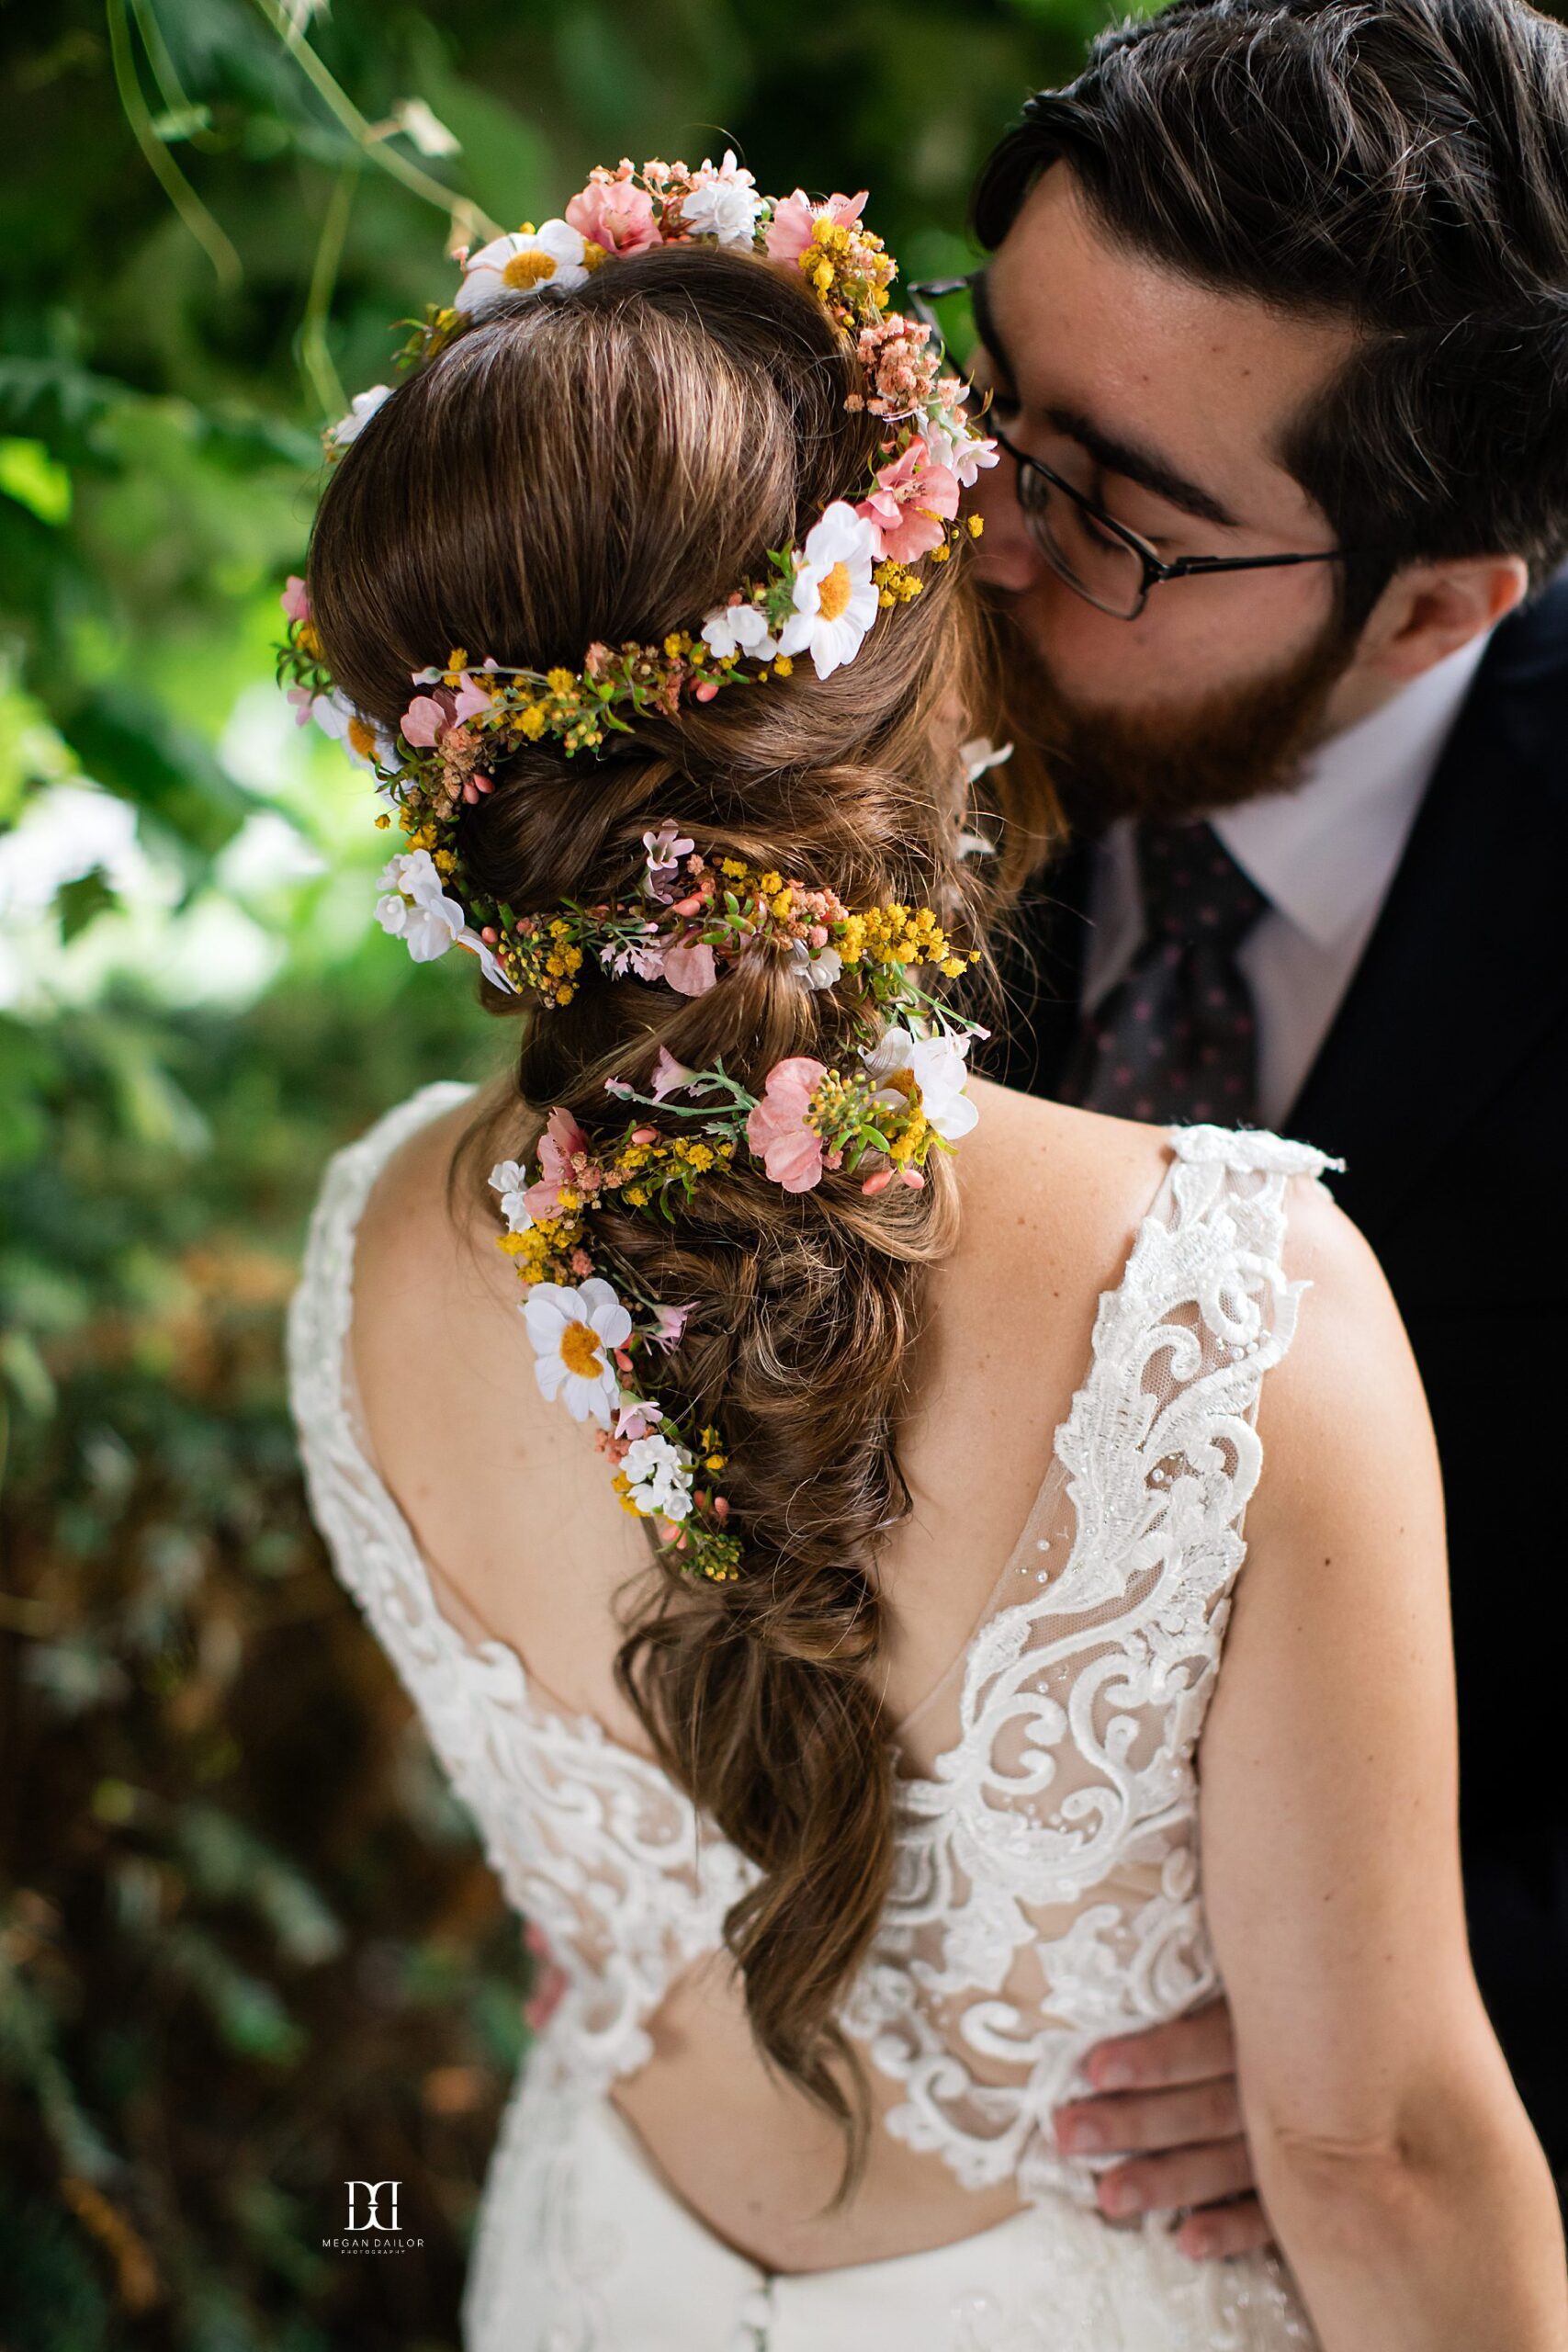 intricate bridal braid with flowers